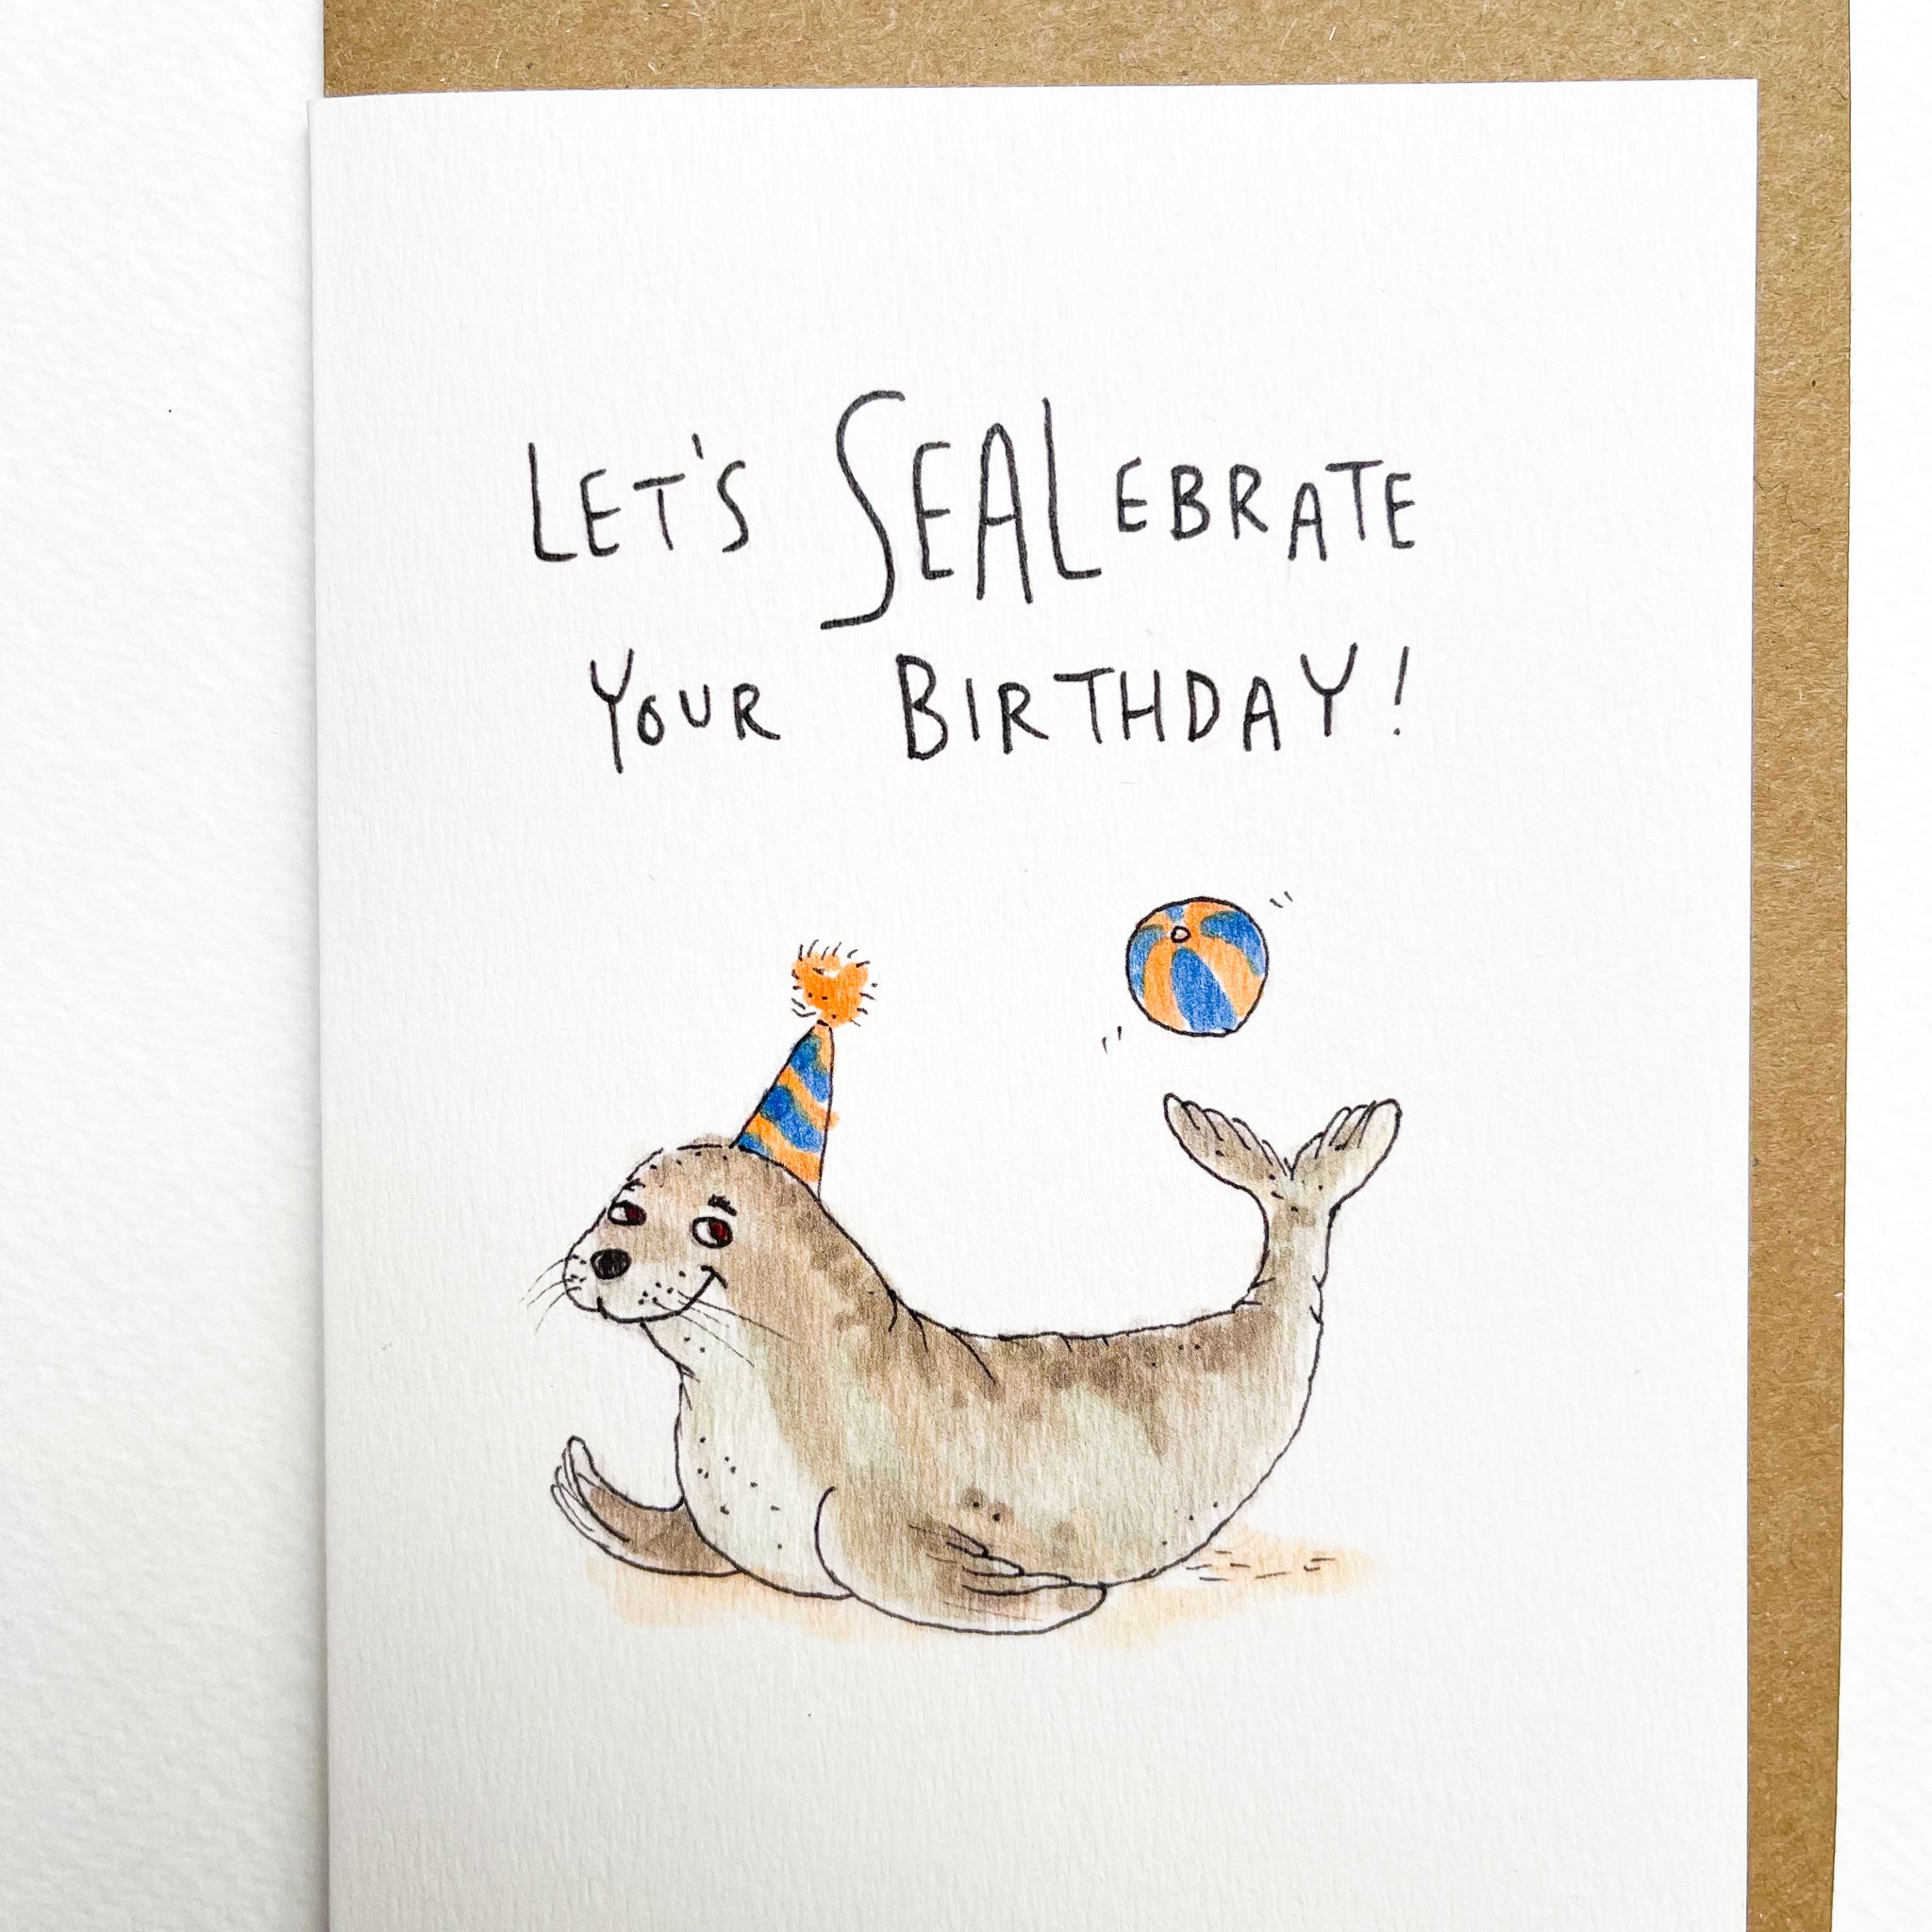 Let's Sealebrate Your Birthday - Well Drawn